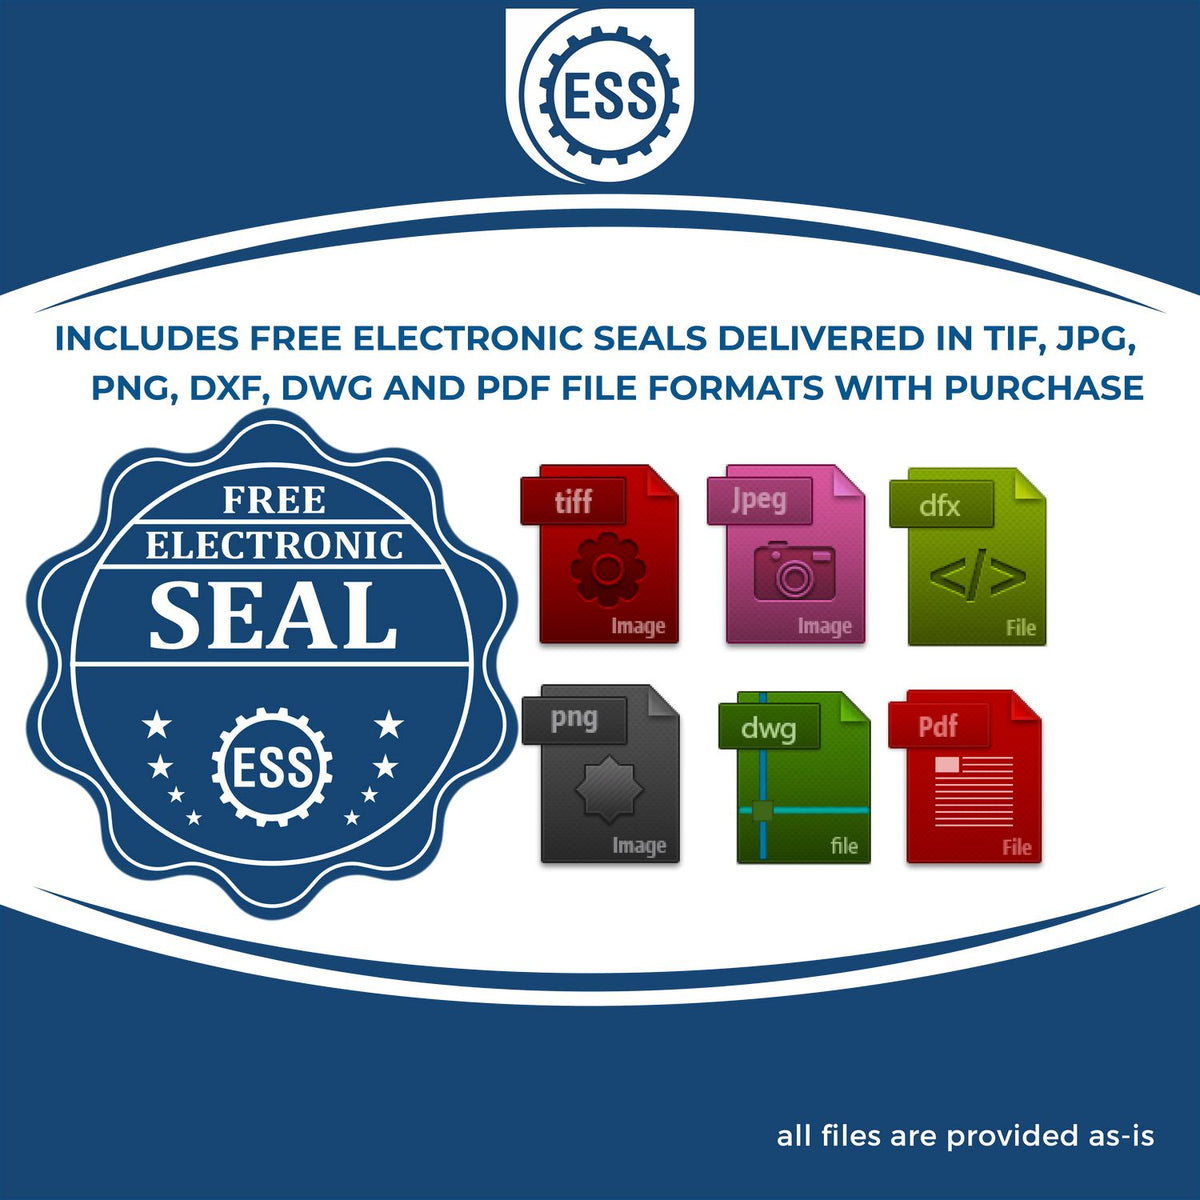 An infographic for the free electronic seal for the Gift Tennessee Land Surveyor Seal illustrating the different file type icons such as DXF, DWG, TIF, JPG and PNG.